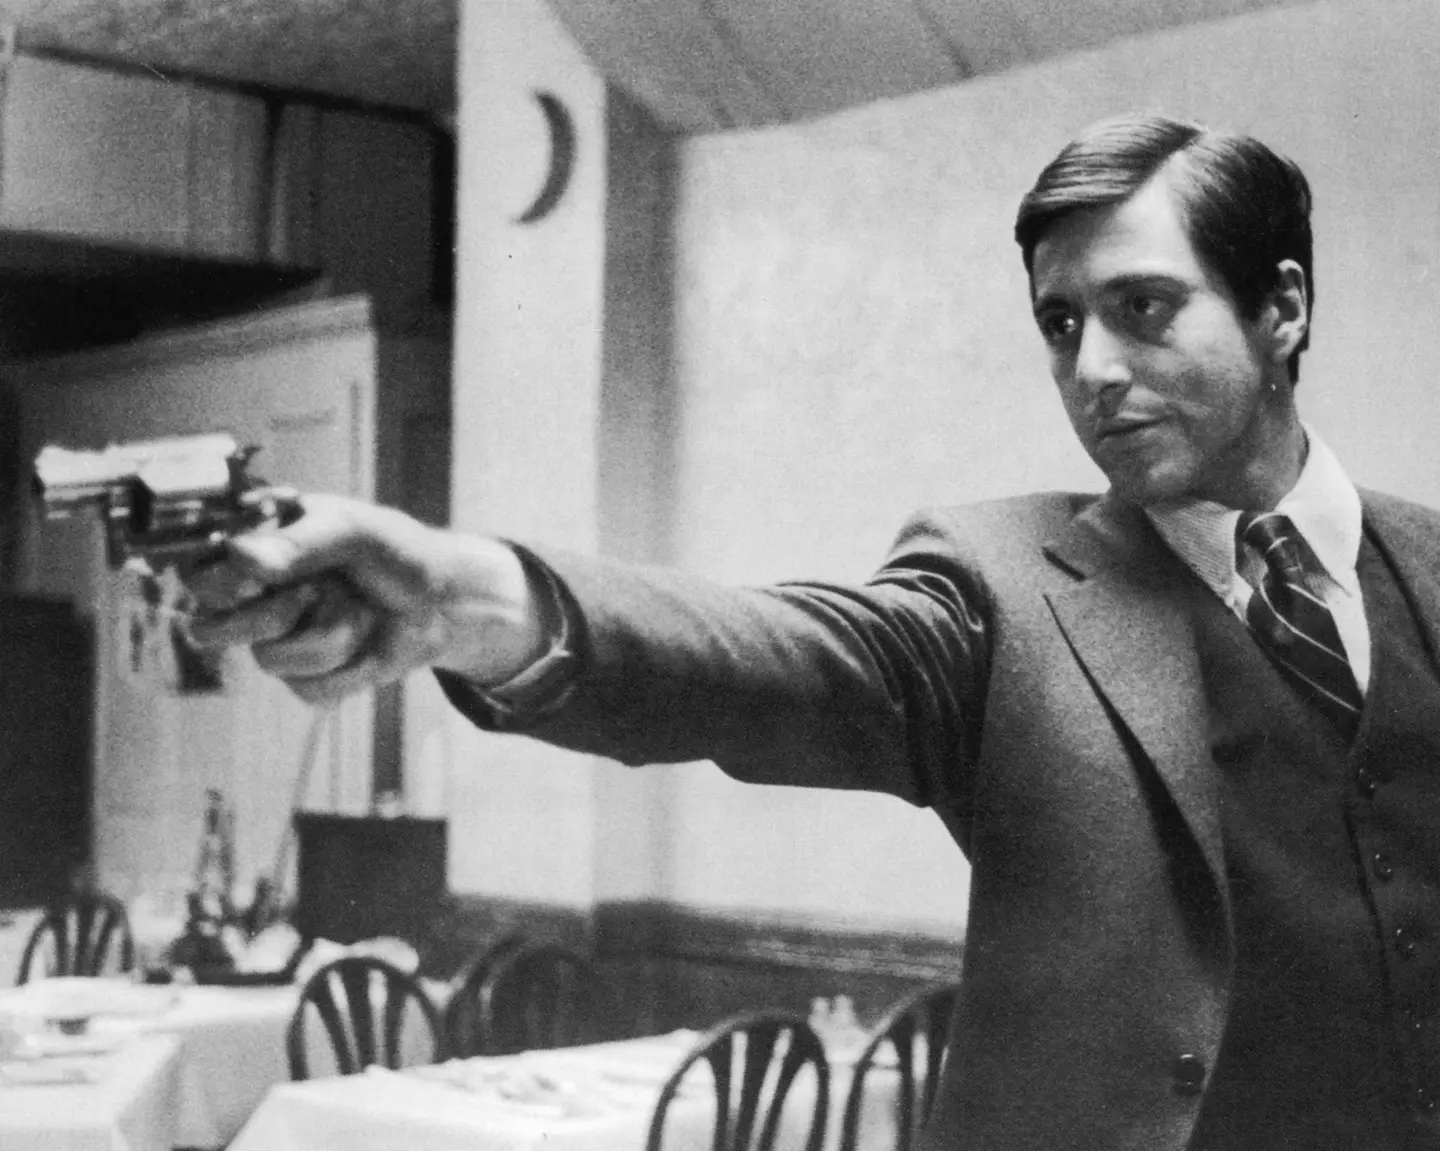 Al Pacino was not happy with his nomination for the first The Godfather film.